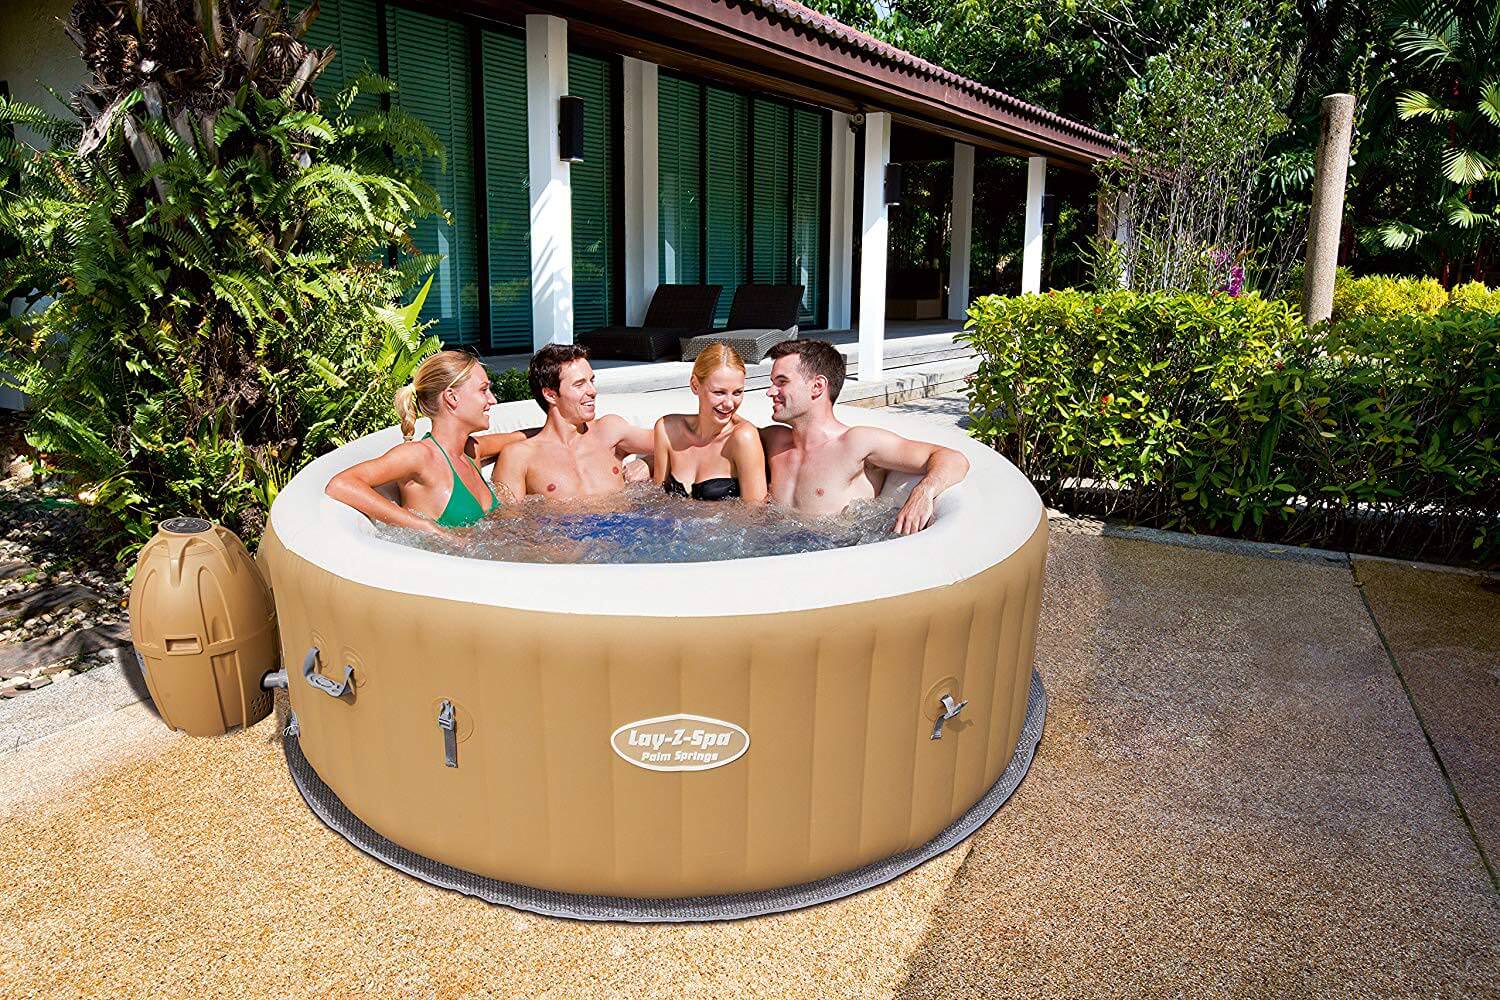 Bestway Lay-Z-Spa Palm Springs 4-6 Hot Buildings Person Garden - Pure Air Inflatable Jet Tub